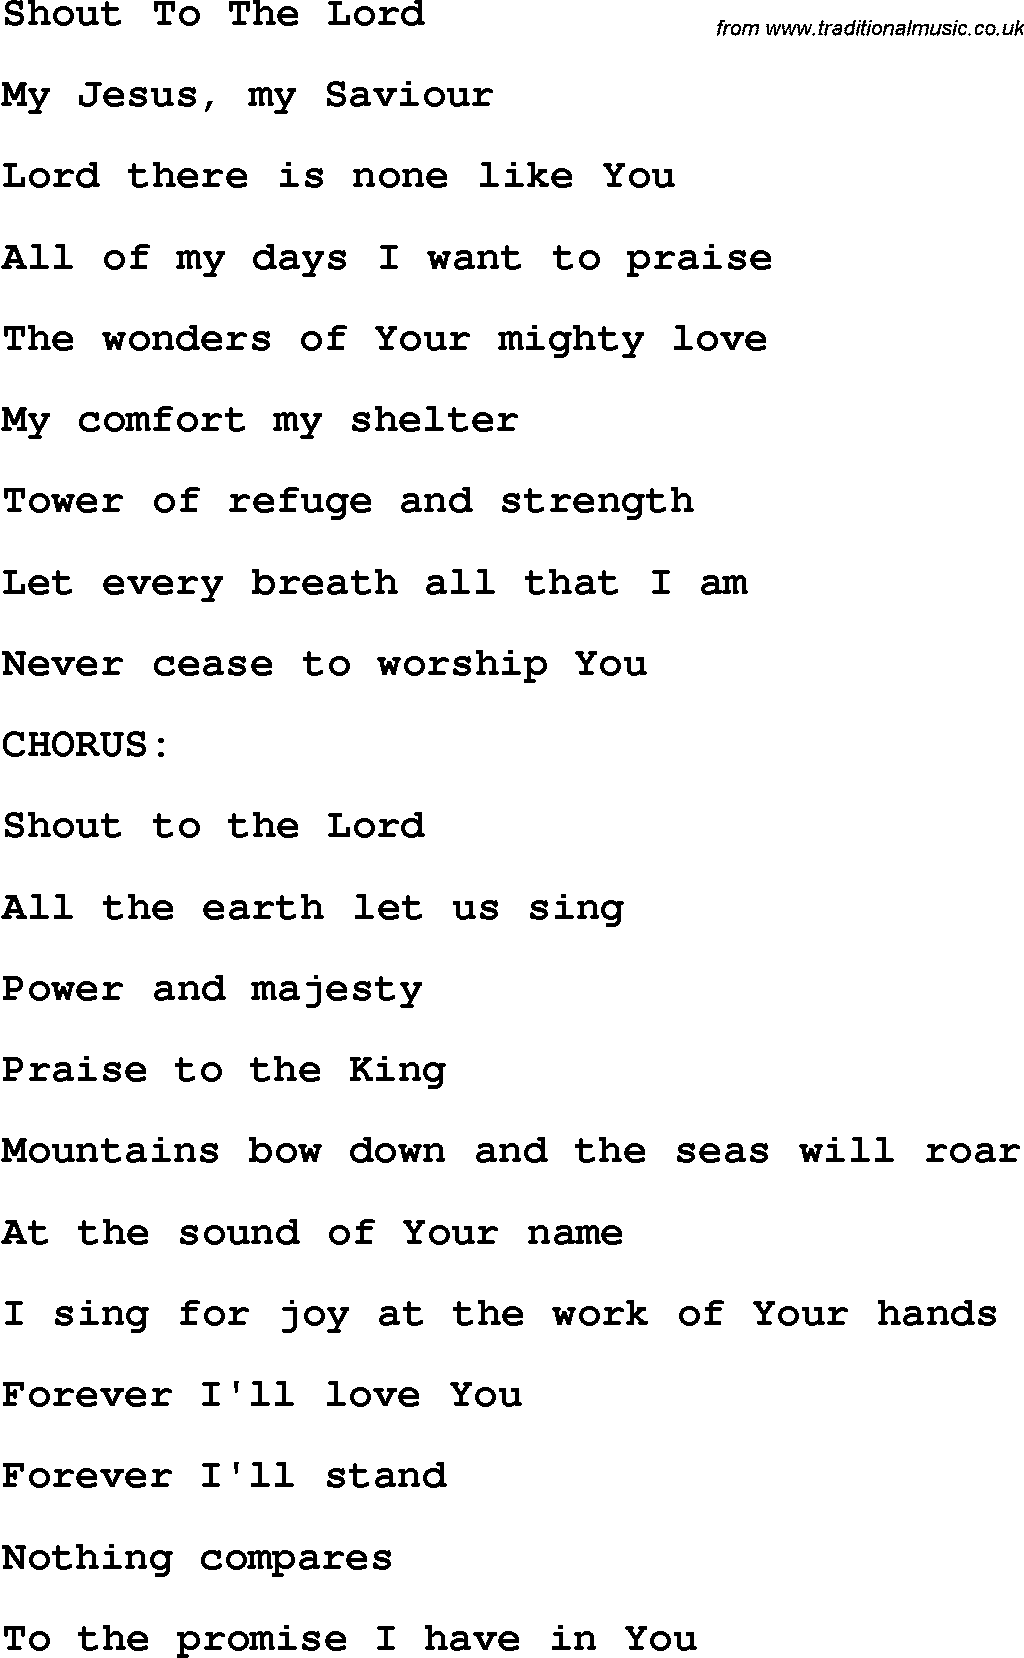 Country, Southern and Bluegrass Gospel Song Shout To The Lord lyrics 